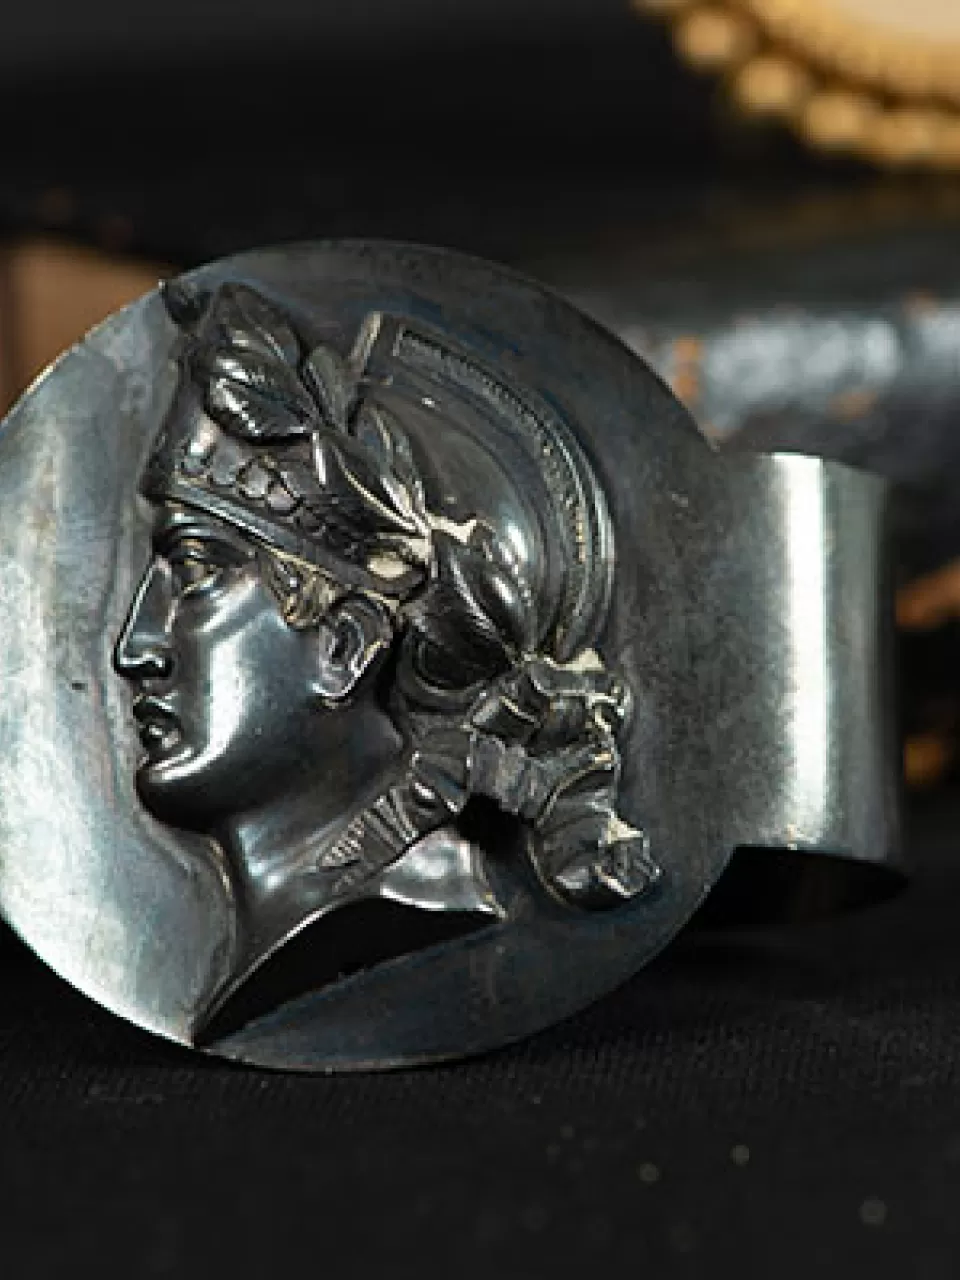 This napkin ring is one of two that once belonged to Constantino Brumidi.